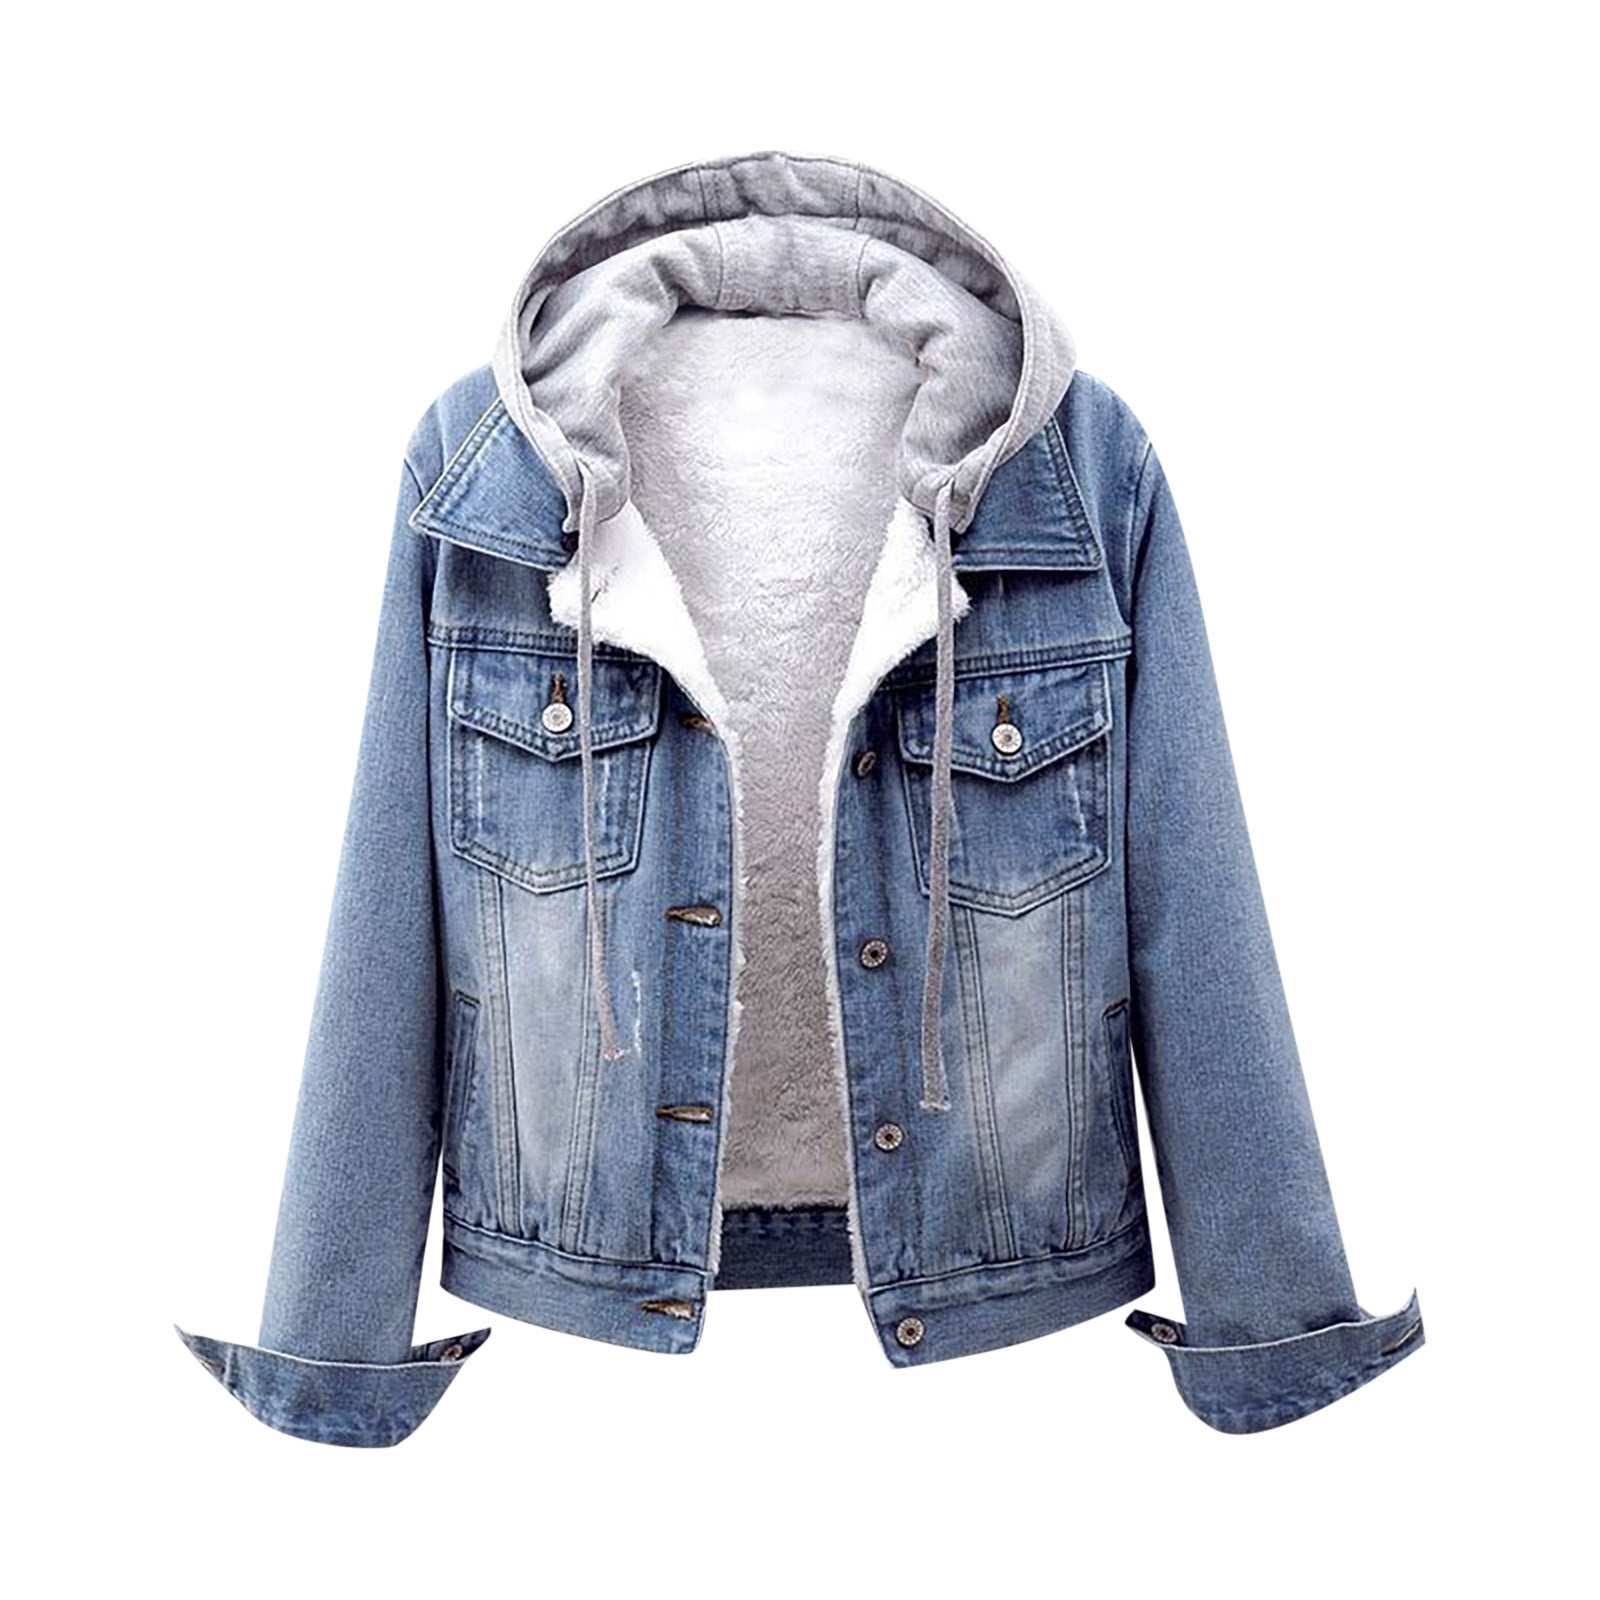 Jeans Jacket at Best Price from Manufacturers, Suppliers & Dealers-calidas.vn